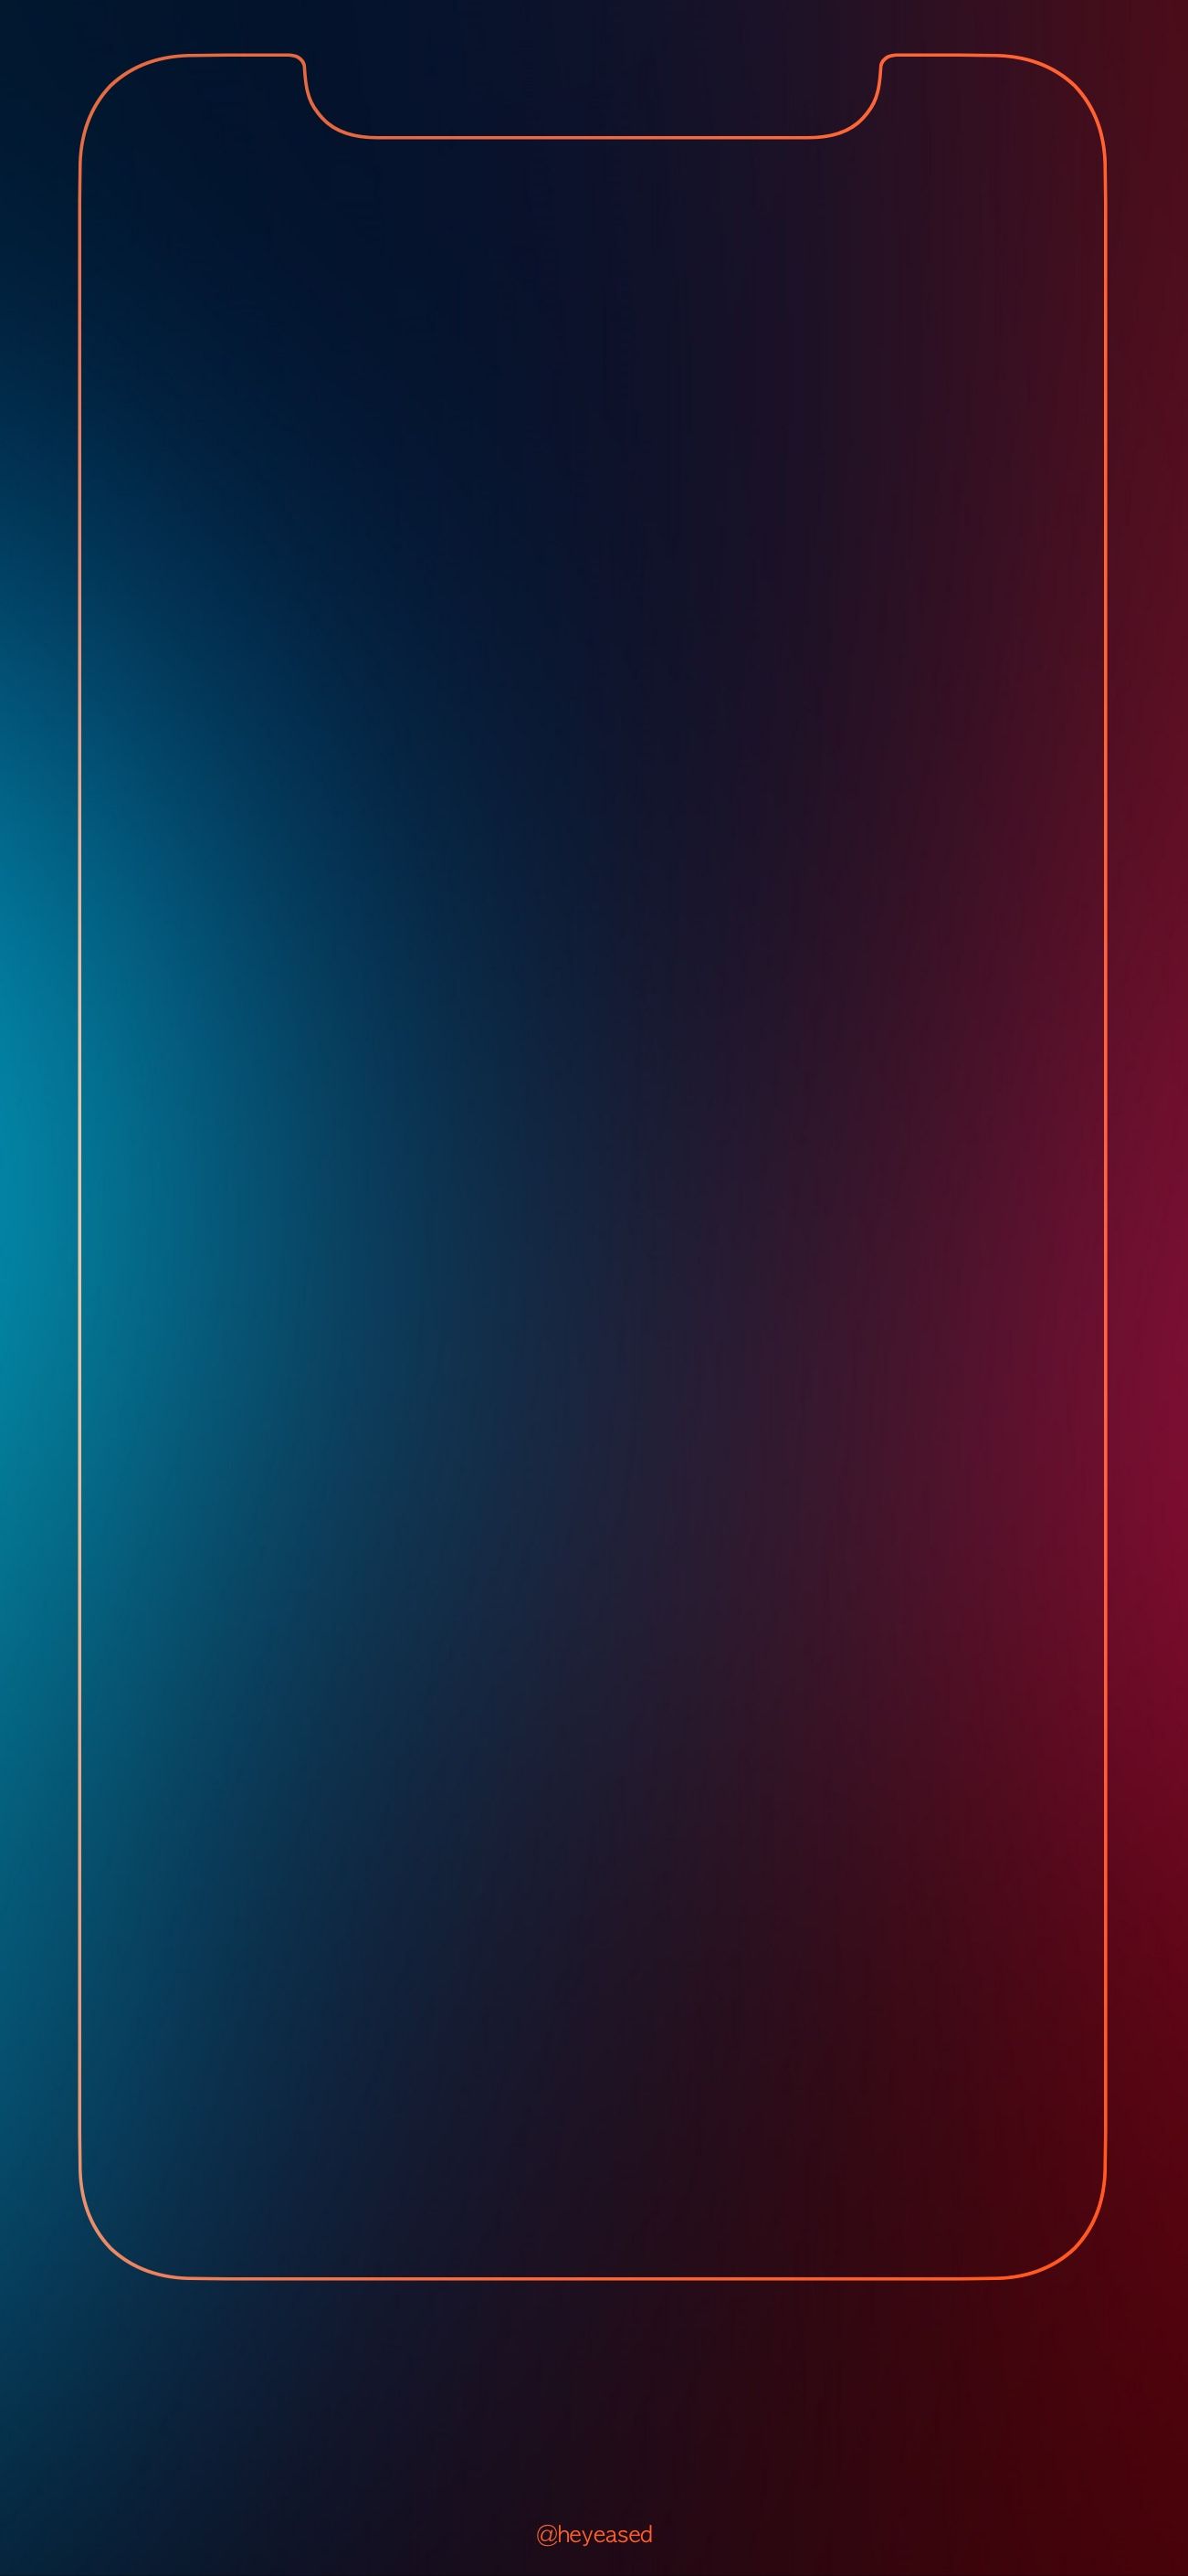 Iphone X Wallpapers Border